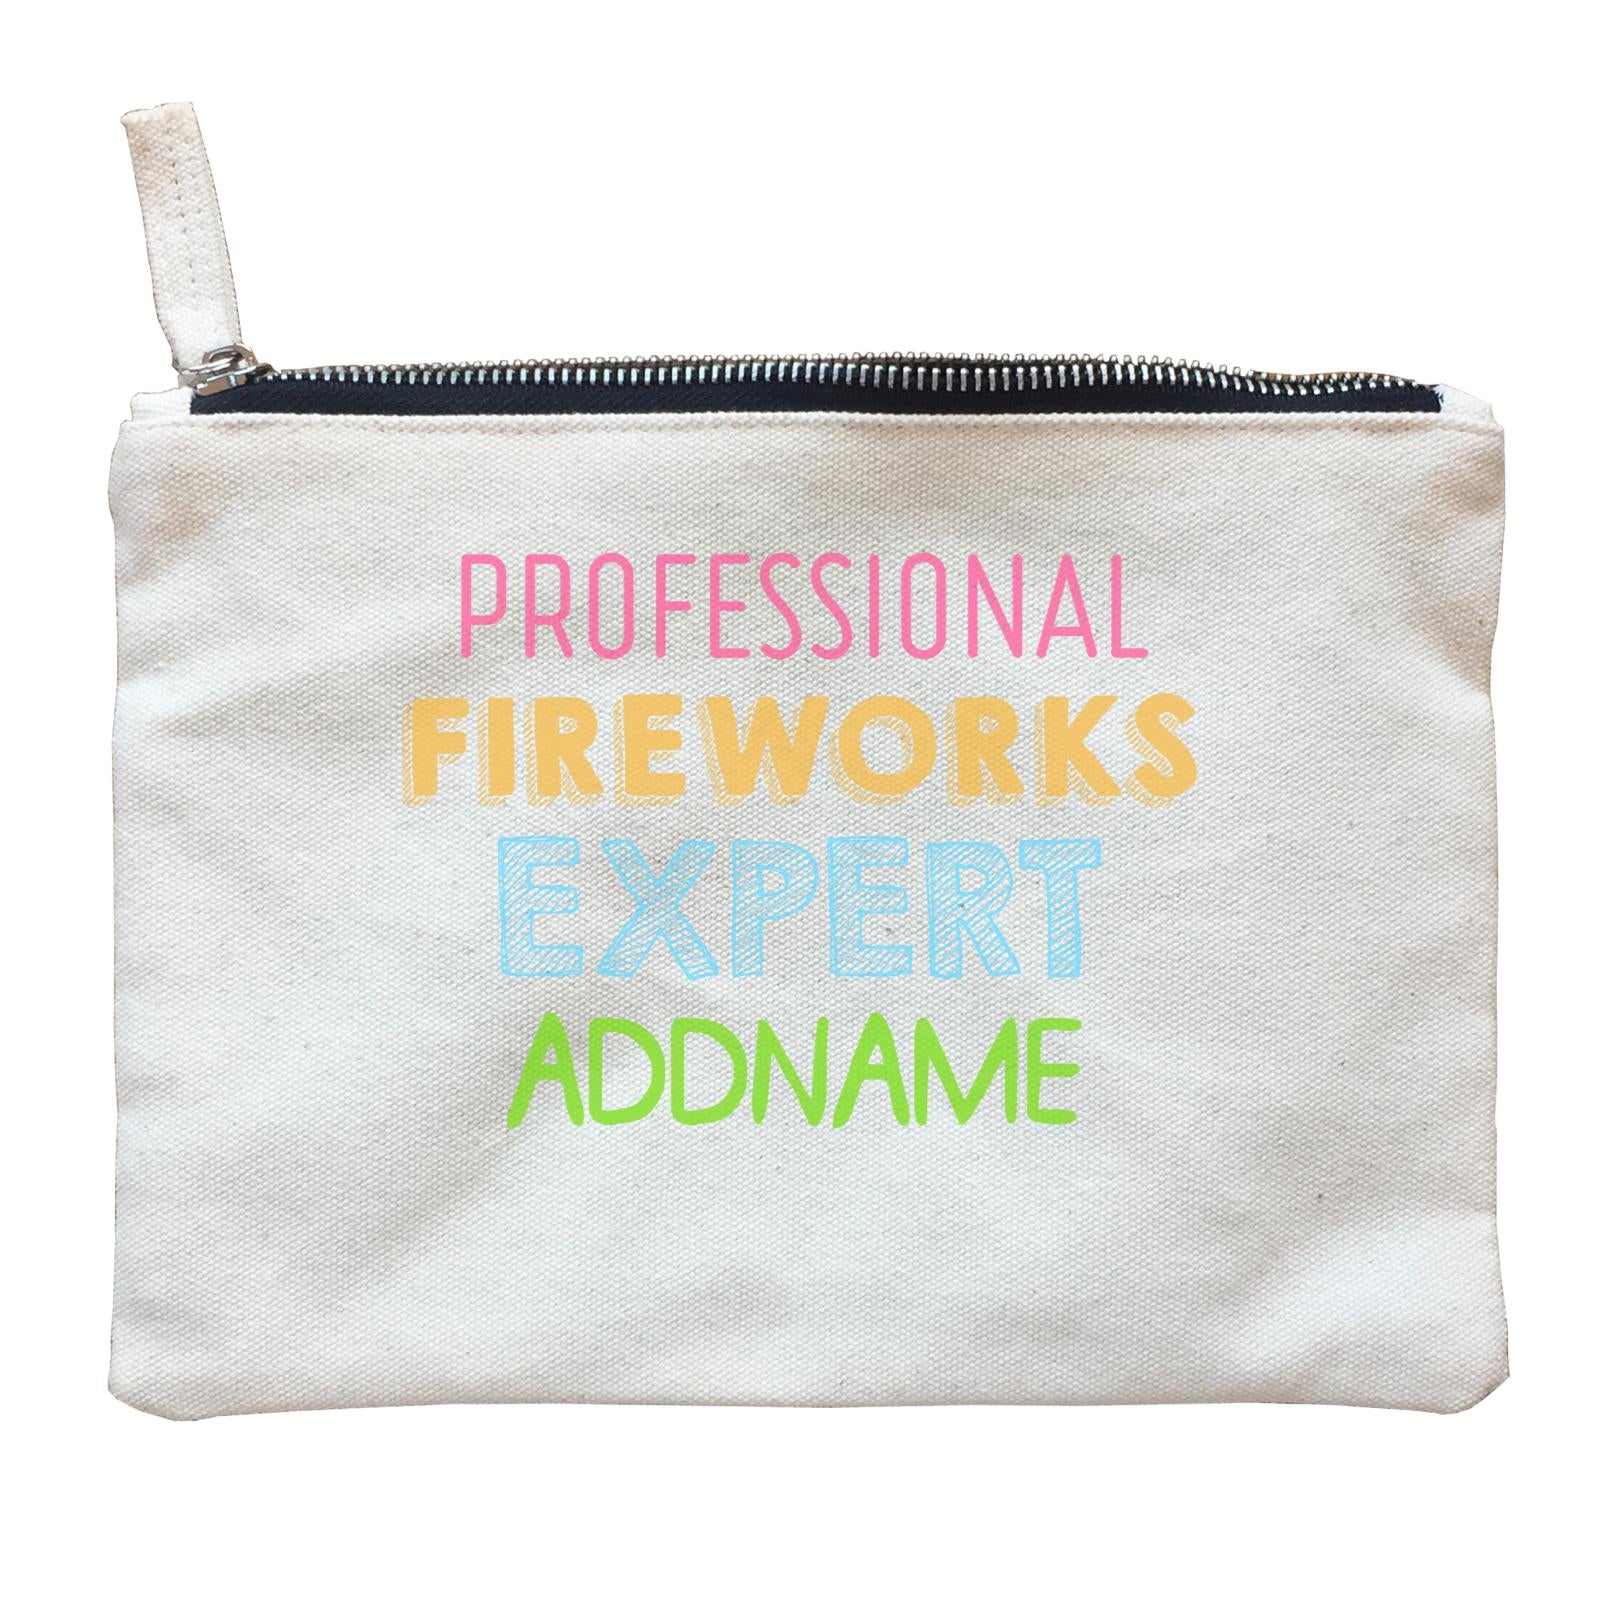 Professional Fireworks Expert Addname Zipper Pouch